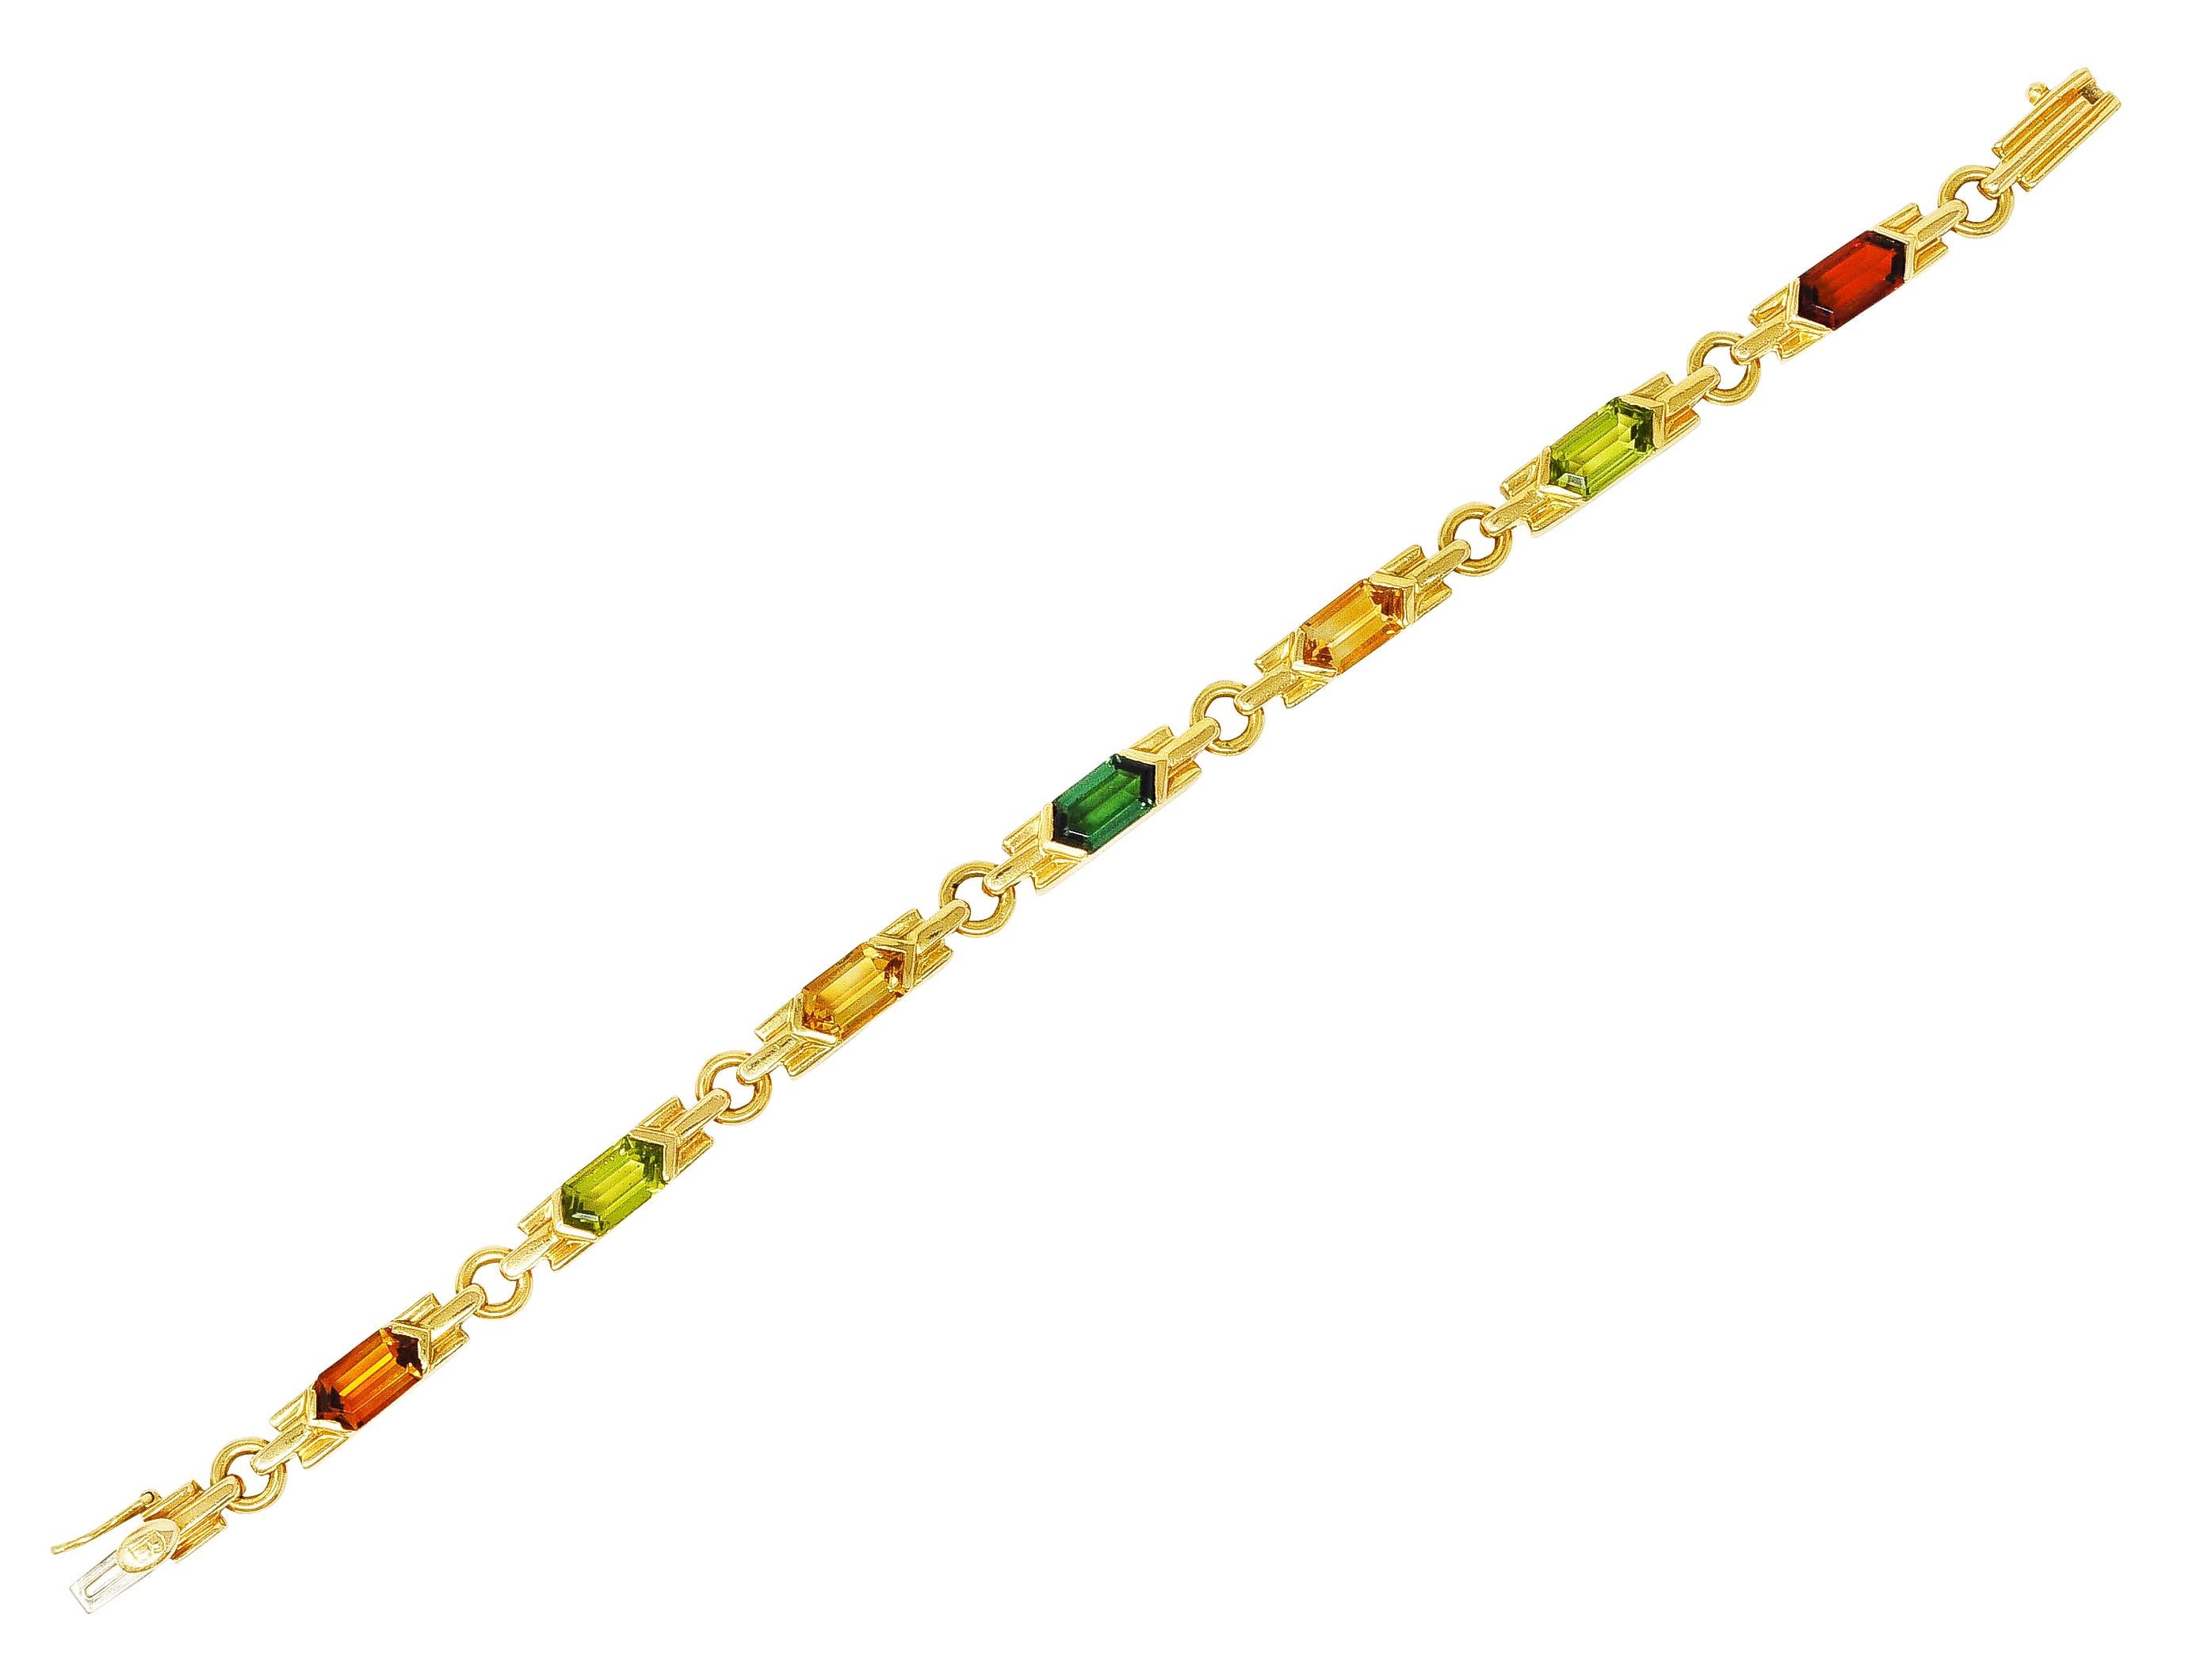 Bracelet is comprised of bar links featuring hexagonal cut gemstones. Featuring yellowish green peridot, evergreen tourmaline, and saturated orange to medium light yellow citrine. Each measuring approximately 9.5 x 5.0 mm and secured by polished